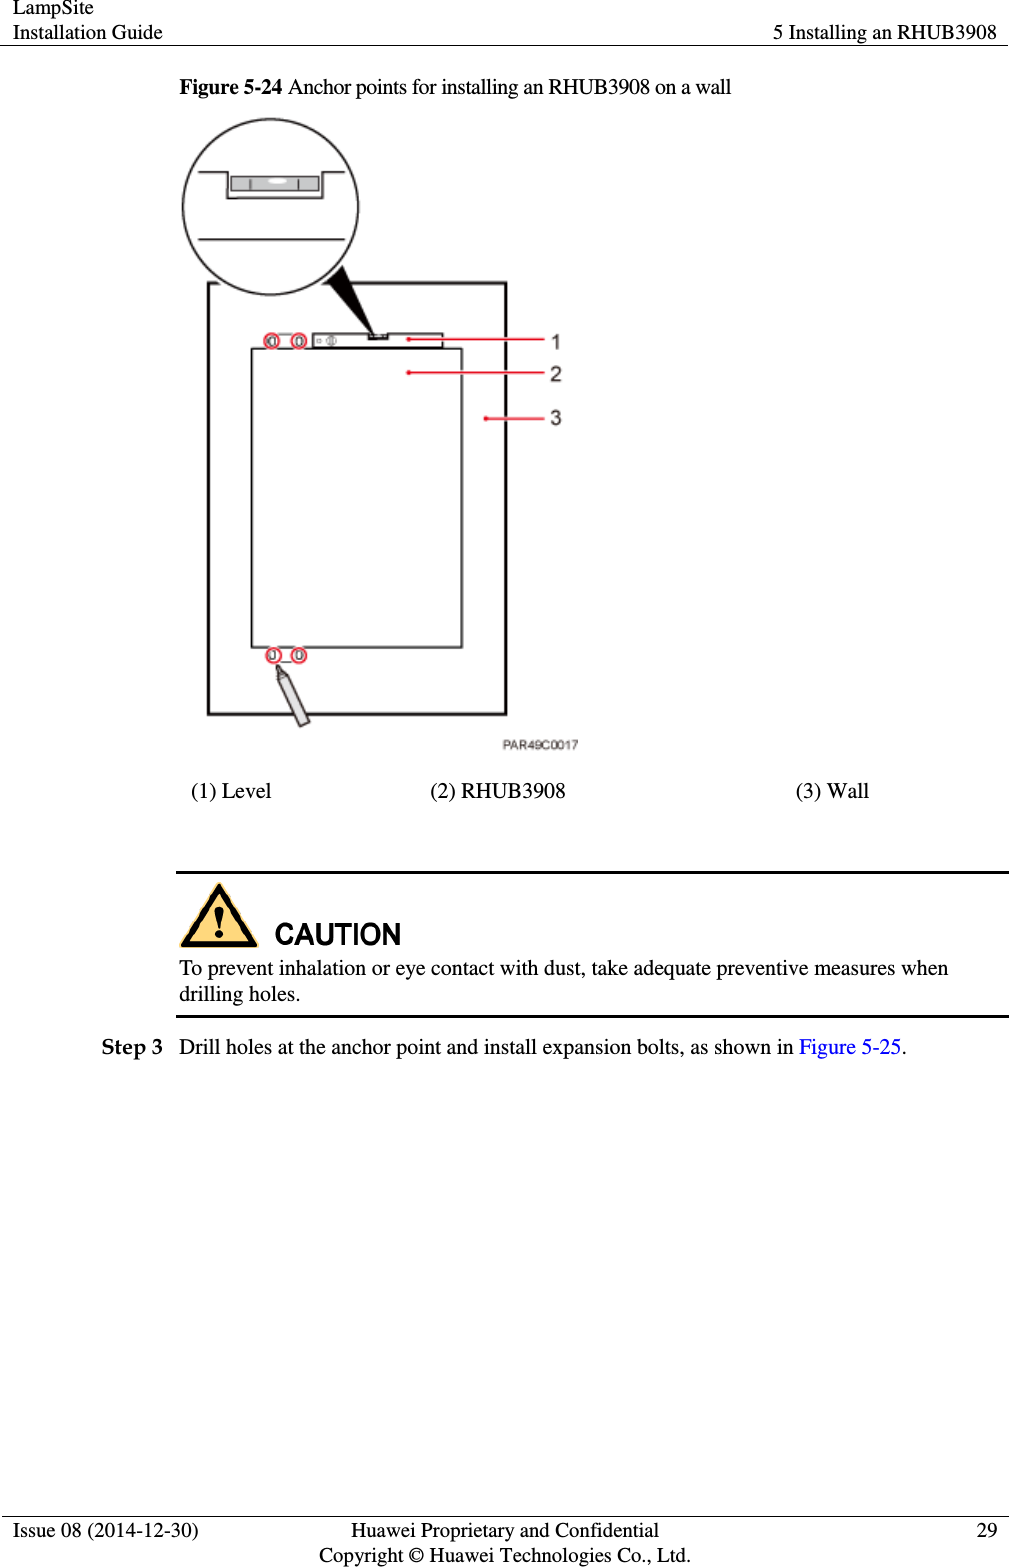 LampSite Installation Guide 5 Installing an RHUB3908  Issue 08 (2014-12-30) Huawei Proprietary and Confidential                                     Copyright © Huawei Technologies Co., Ltd. 29  Figure 5-24 Anchor points for installing an RHUB3908 on a wall  (1) Level (2) RHUB3908 (3) Wall   To prevent inhalation or eye contact with dust, take adequate preventive measures when drilling holes.   Step 3 Drill holes at the anchor point and install expansion bolts, as shown in Figure 5-25.   